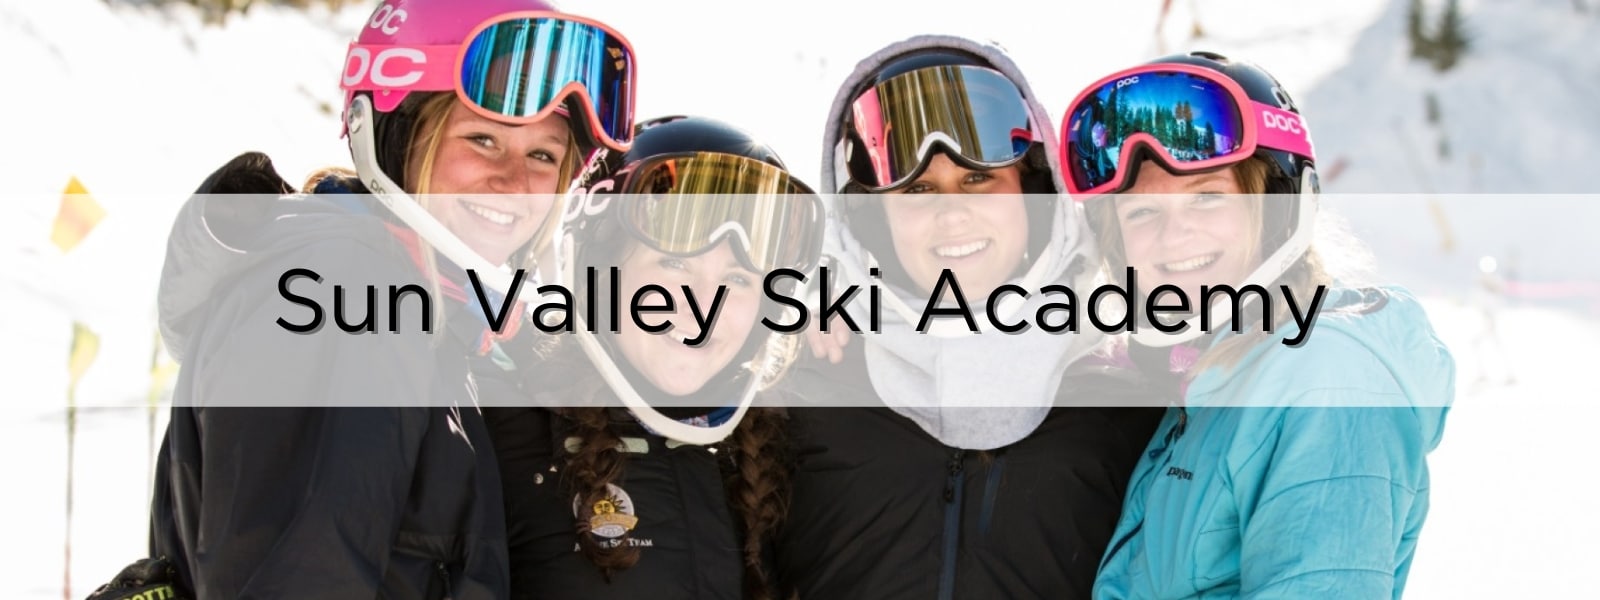 The Sun Valley Community School and the Sun Valley Ski Academy combine together to balance education and athletics. Banner